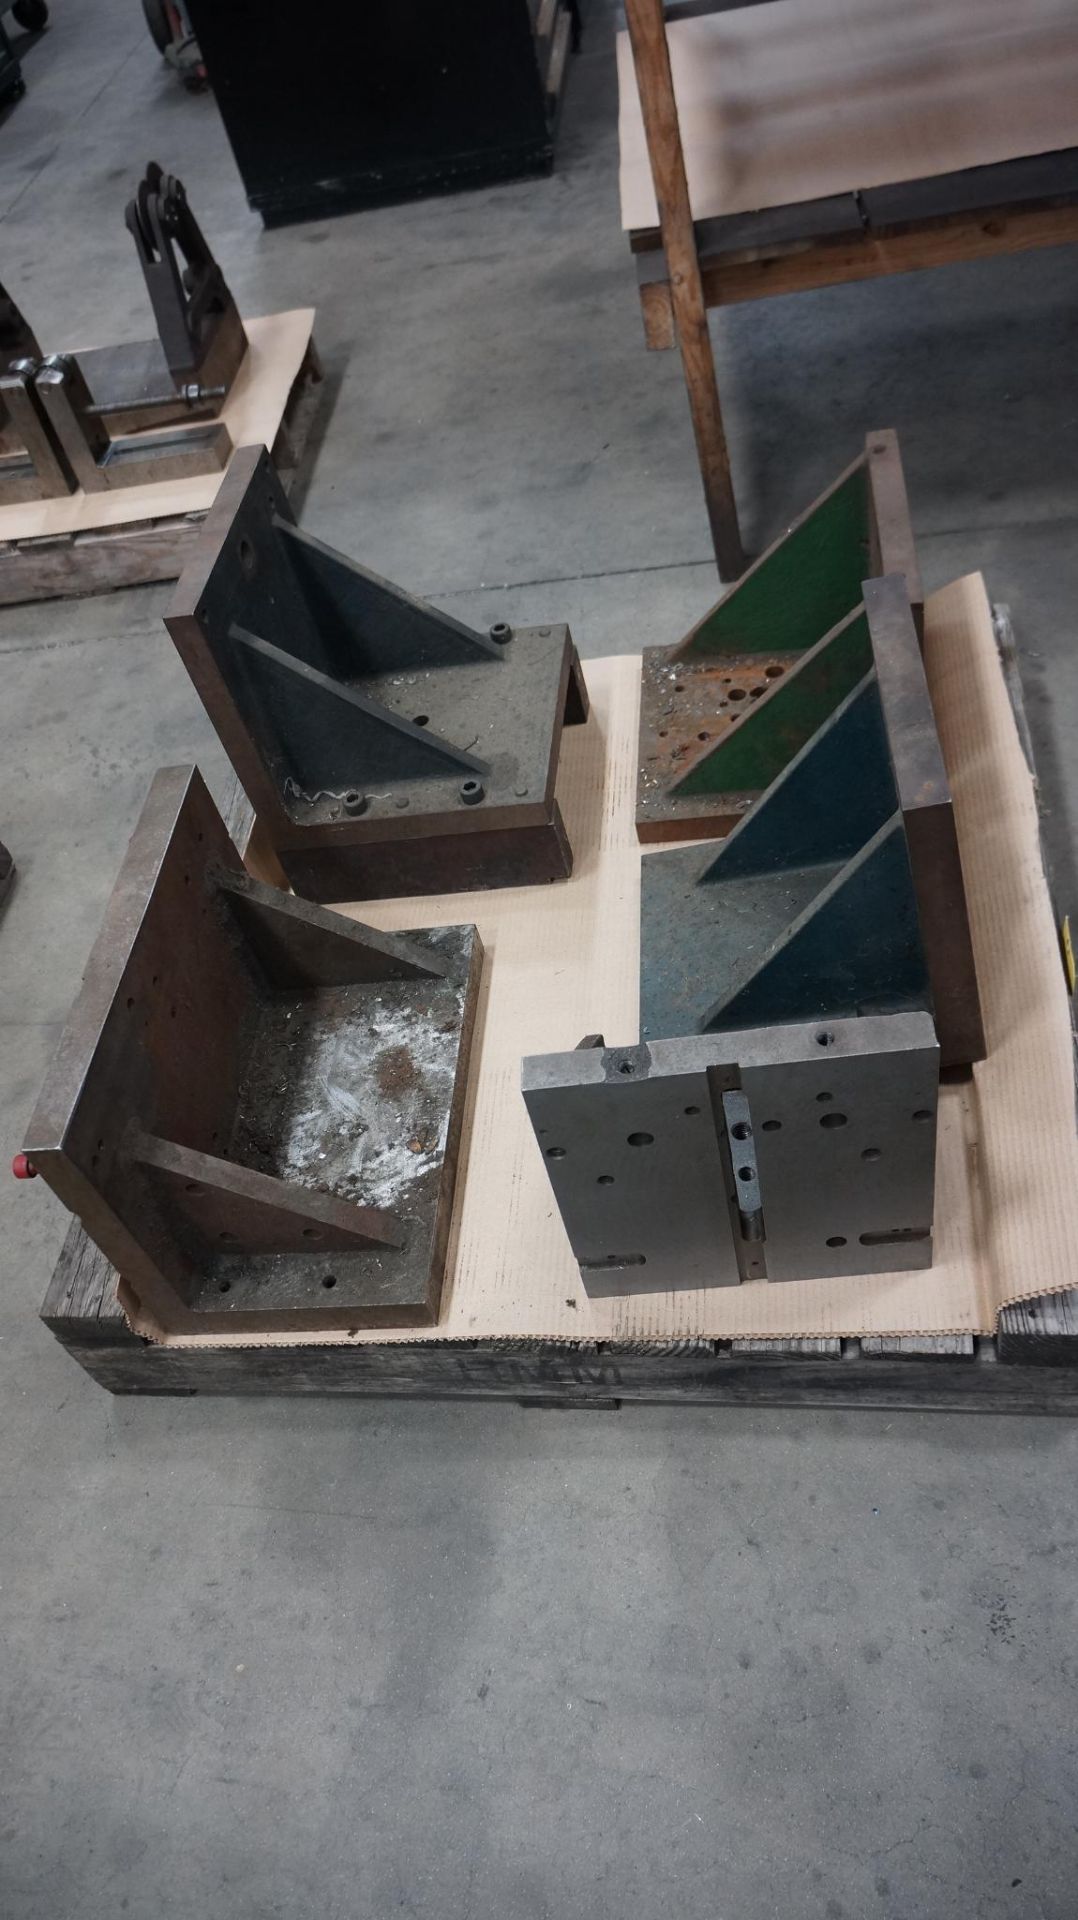 LOT OF ANGLE PLATES (THREE PALLETS) approx. (15) ranging in size from 12" x 24"W. x 17" tall to 5" x - Image 5 of 8